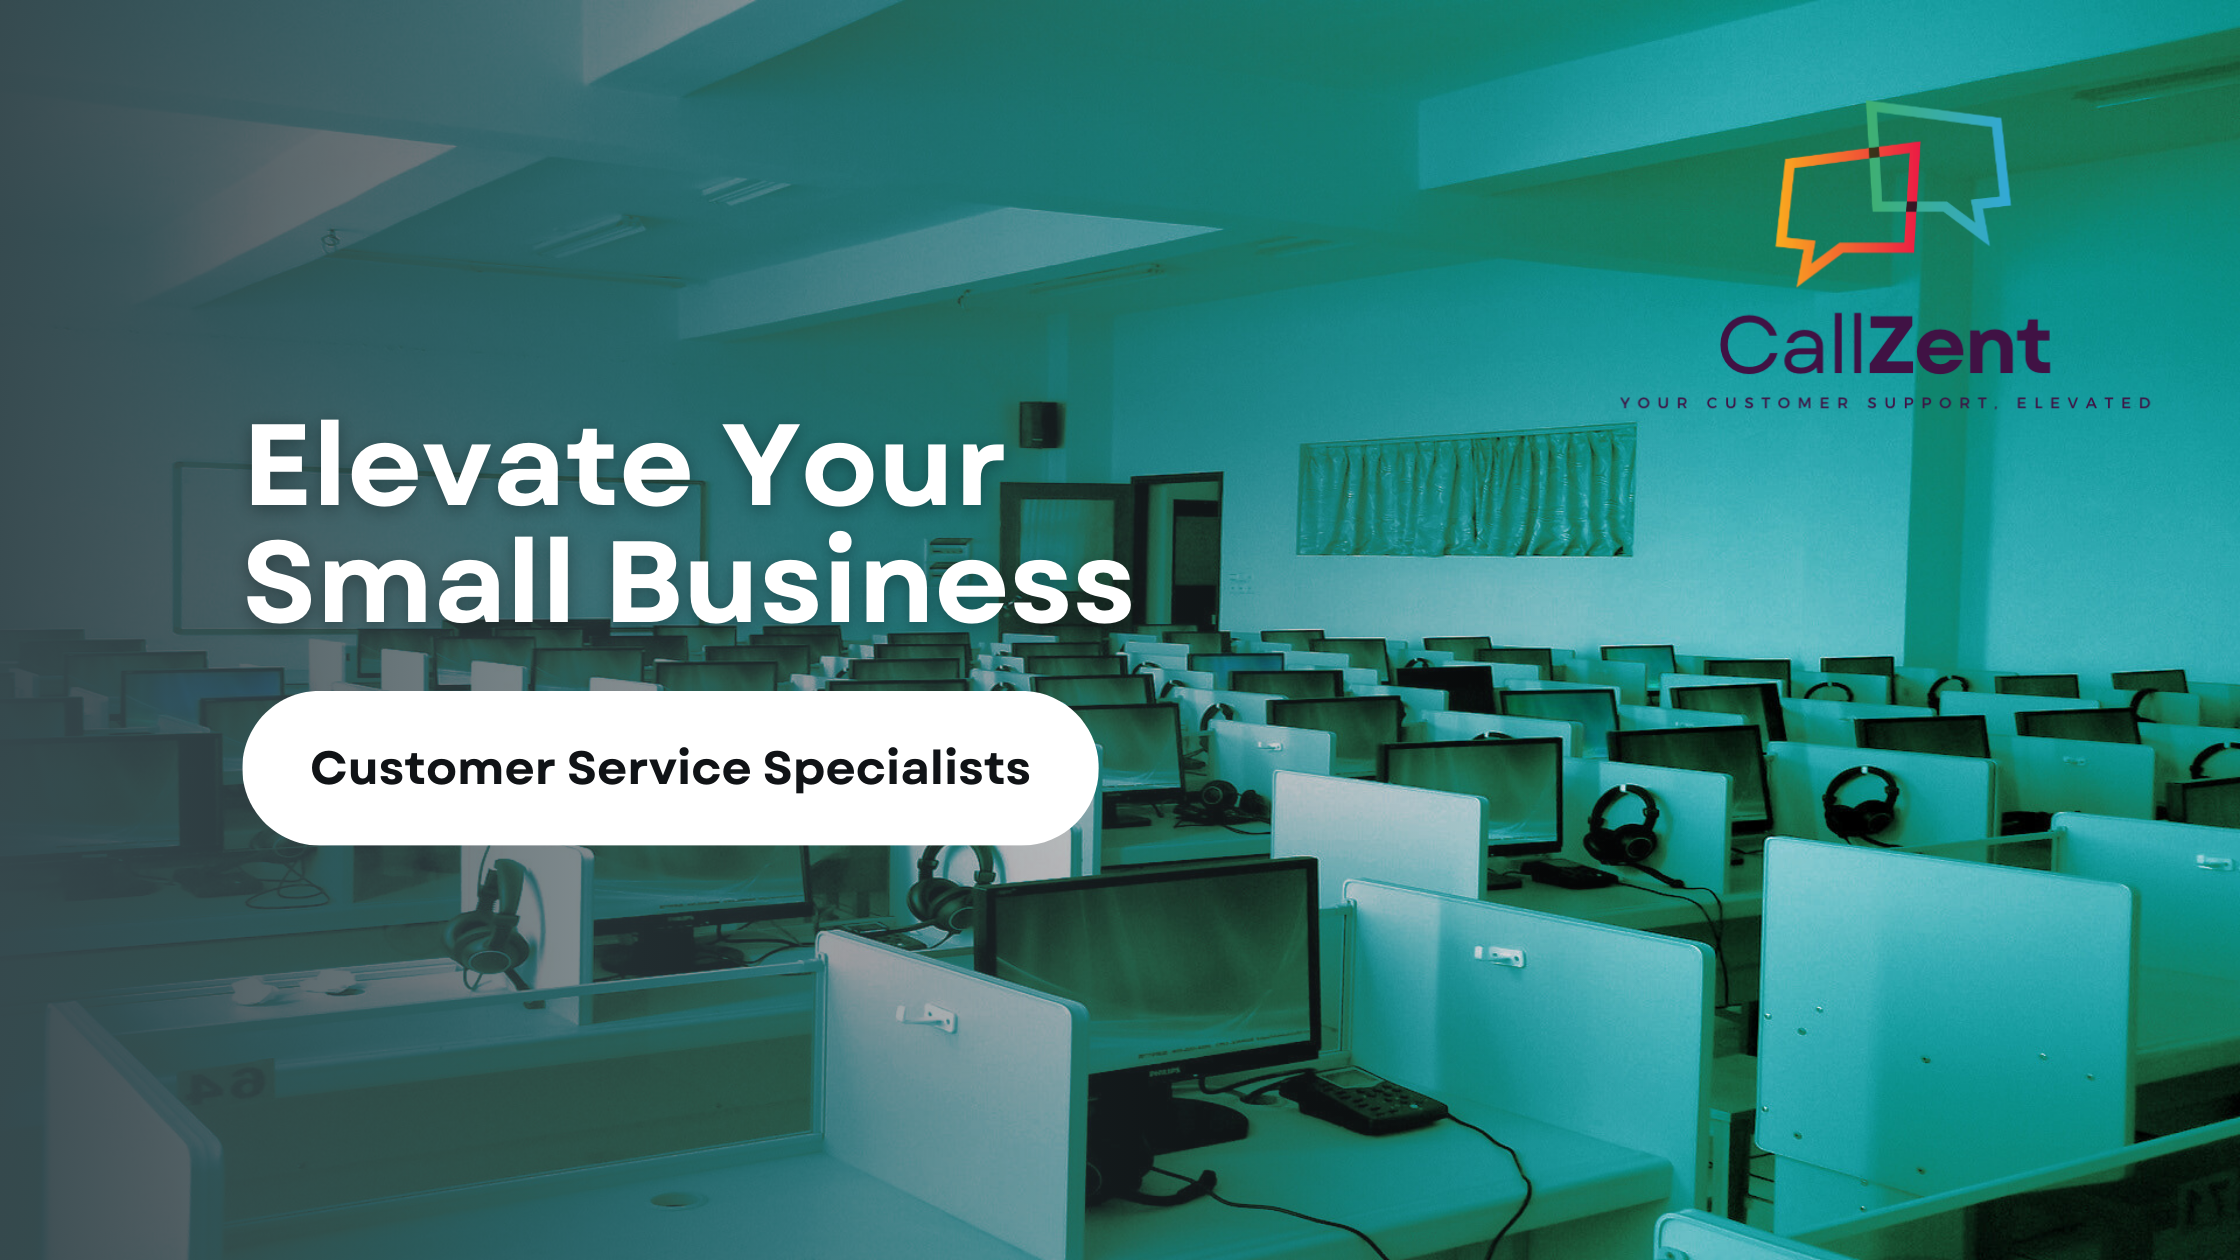 Customer Service Specialists